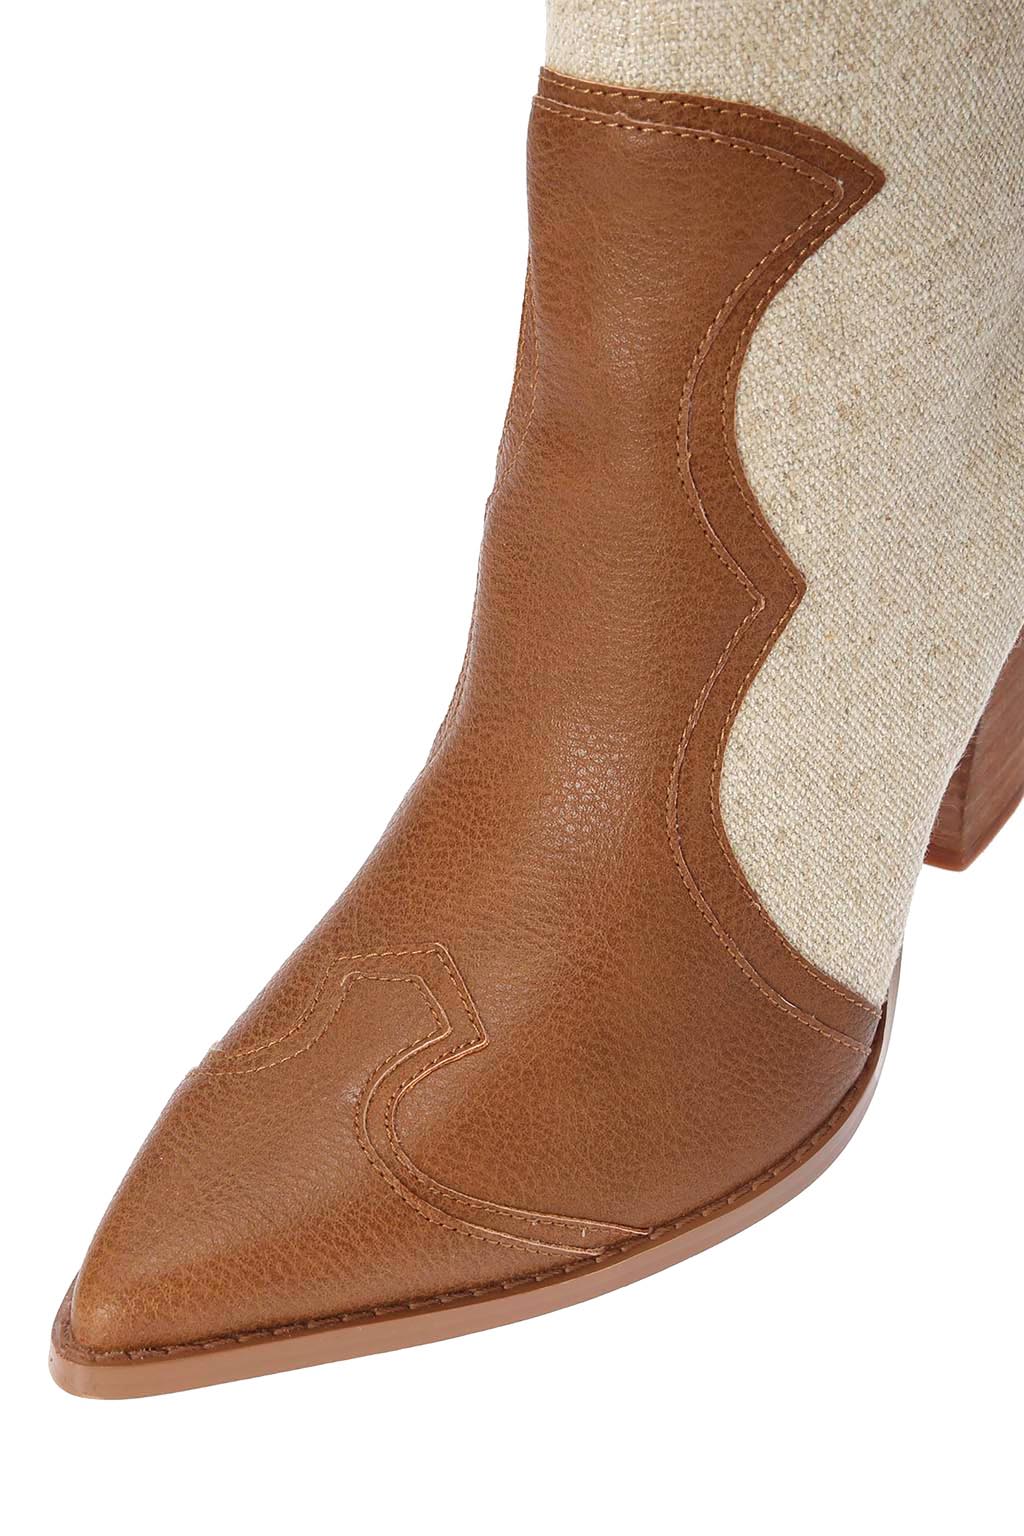 western-boots-canel-08